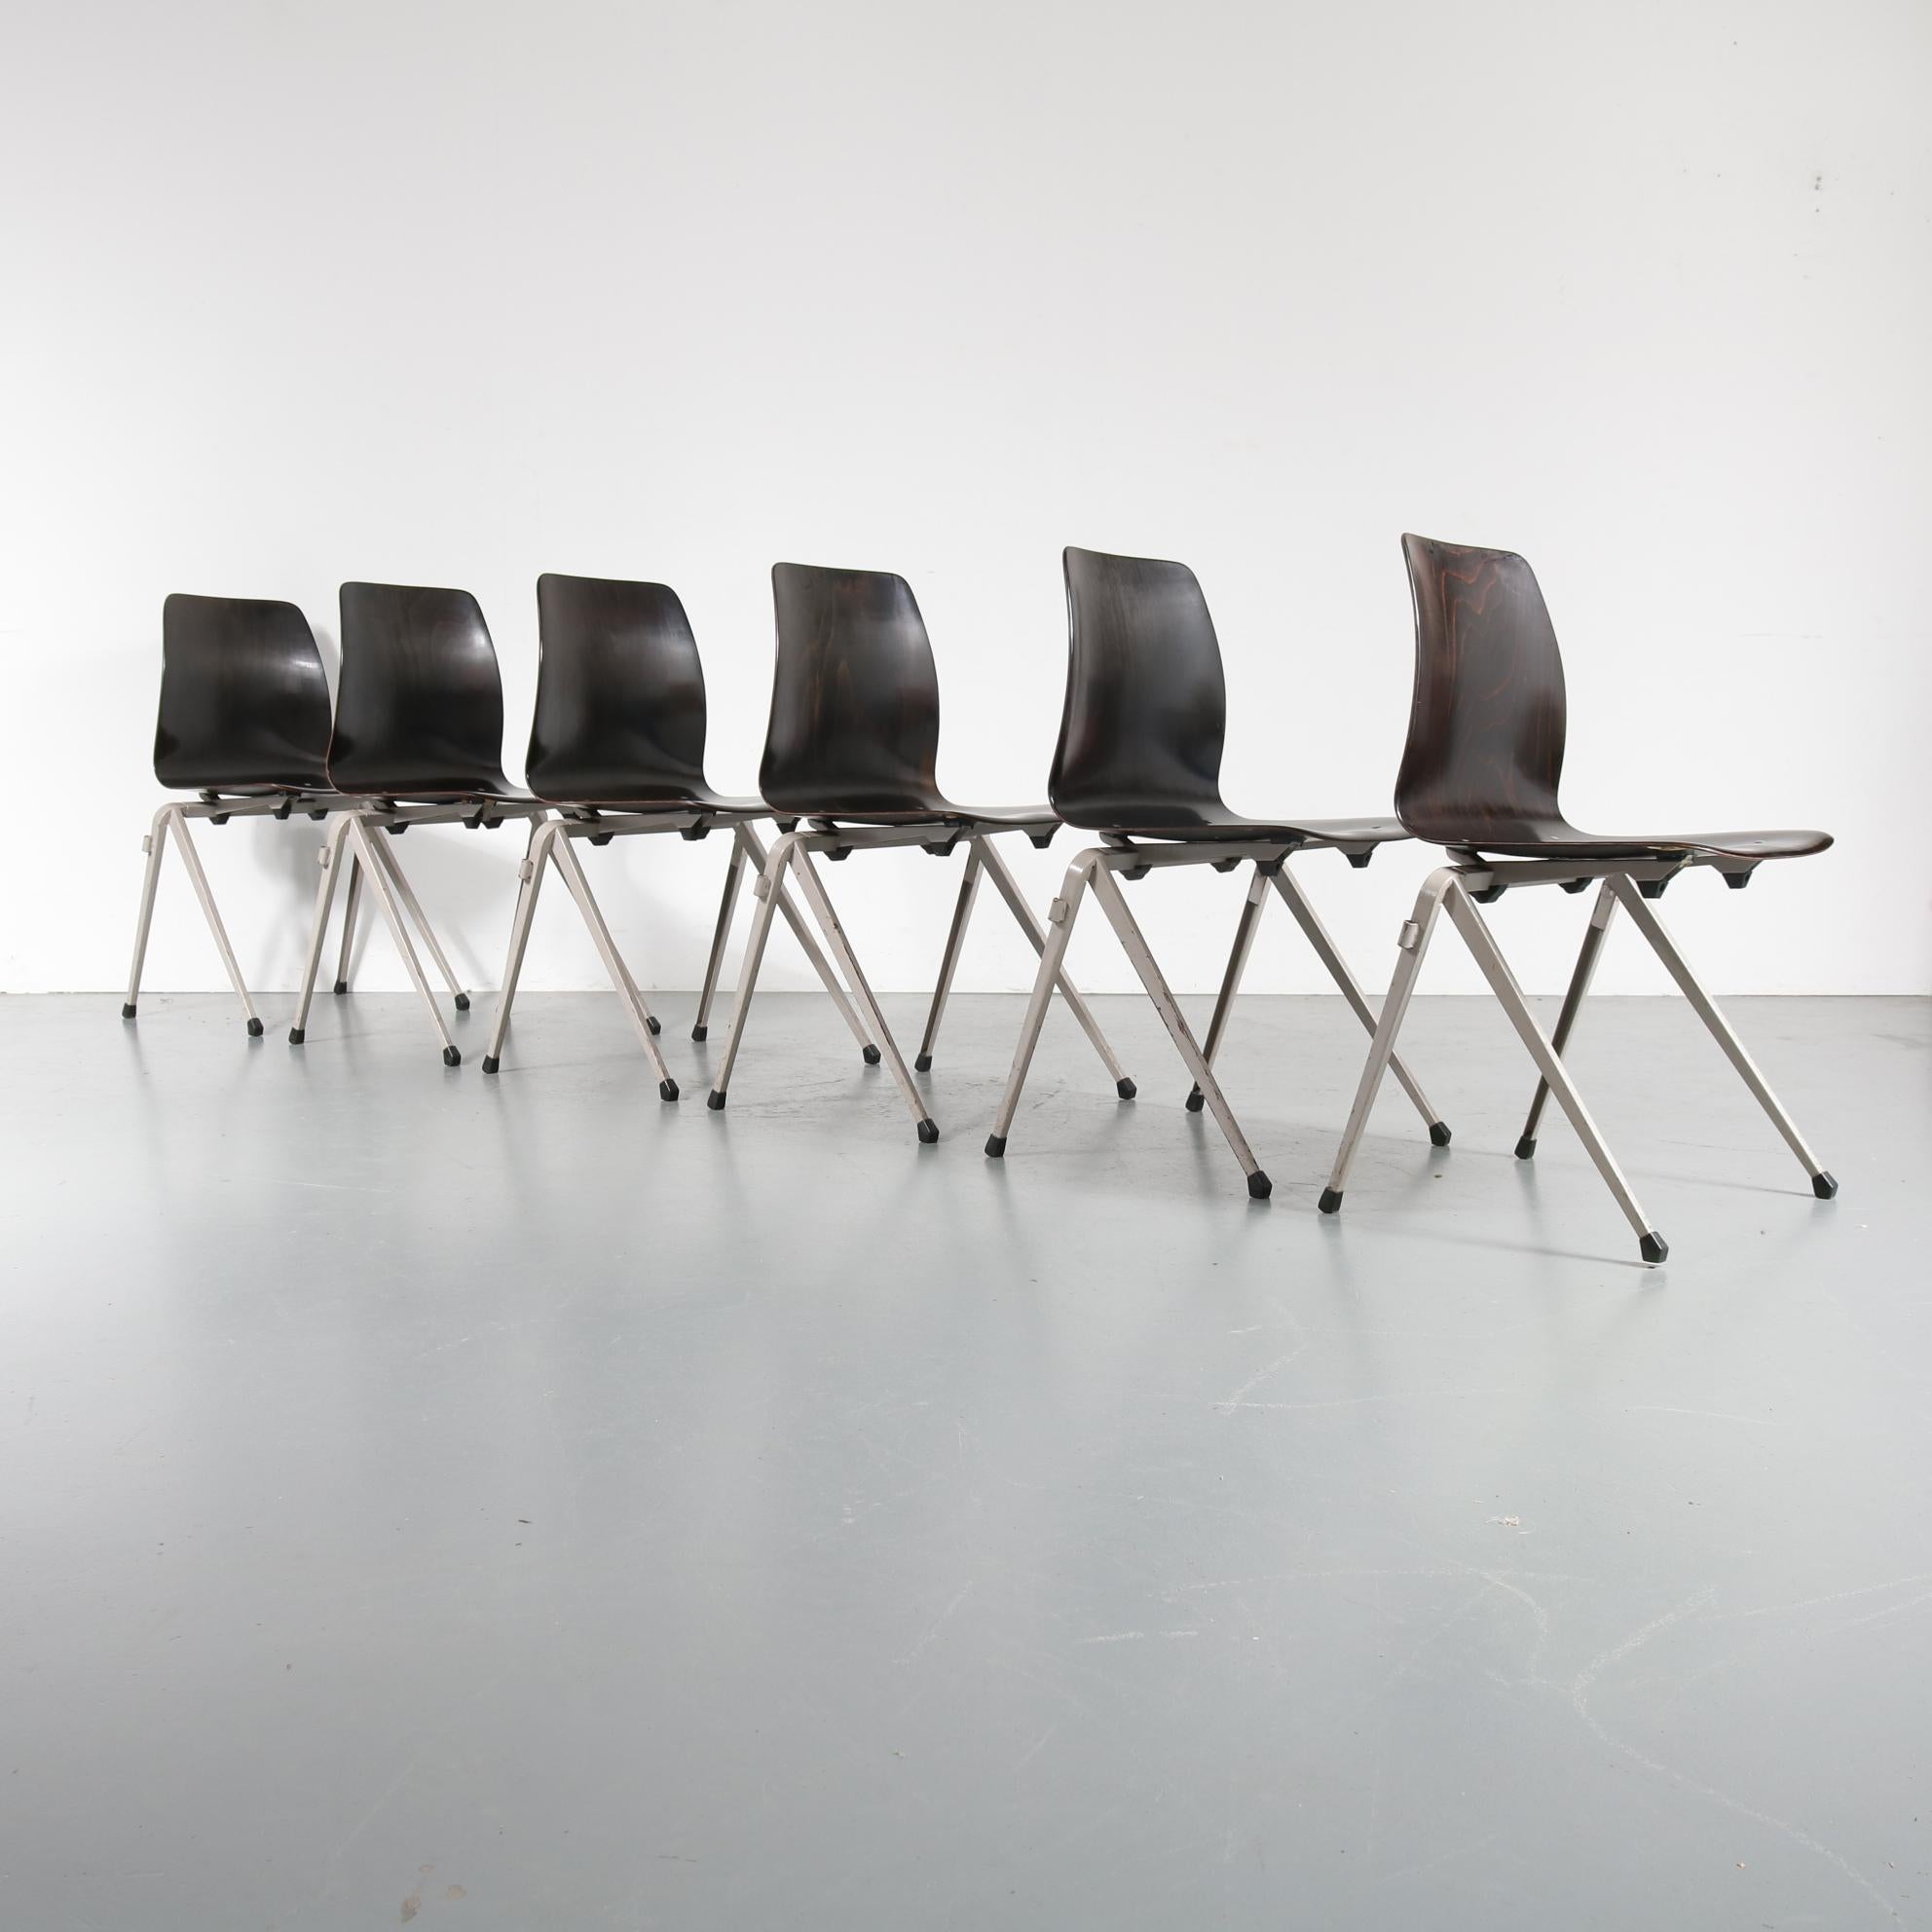 An impressive stock of 148 Industrial styled dining chairs, model S22, manufactured in The Netherlands by Galvanitas, circa 1970.

The chairs have eye-catching V-shaped legs and are linkable and stackable. This makes them perfectly suitable for